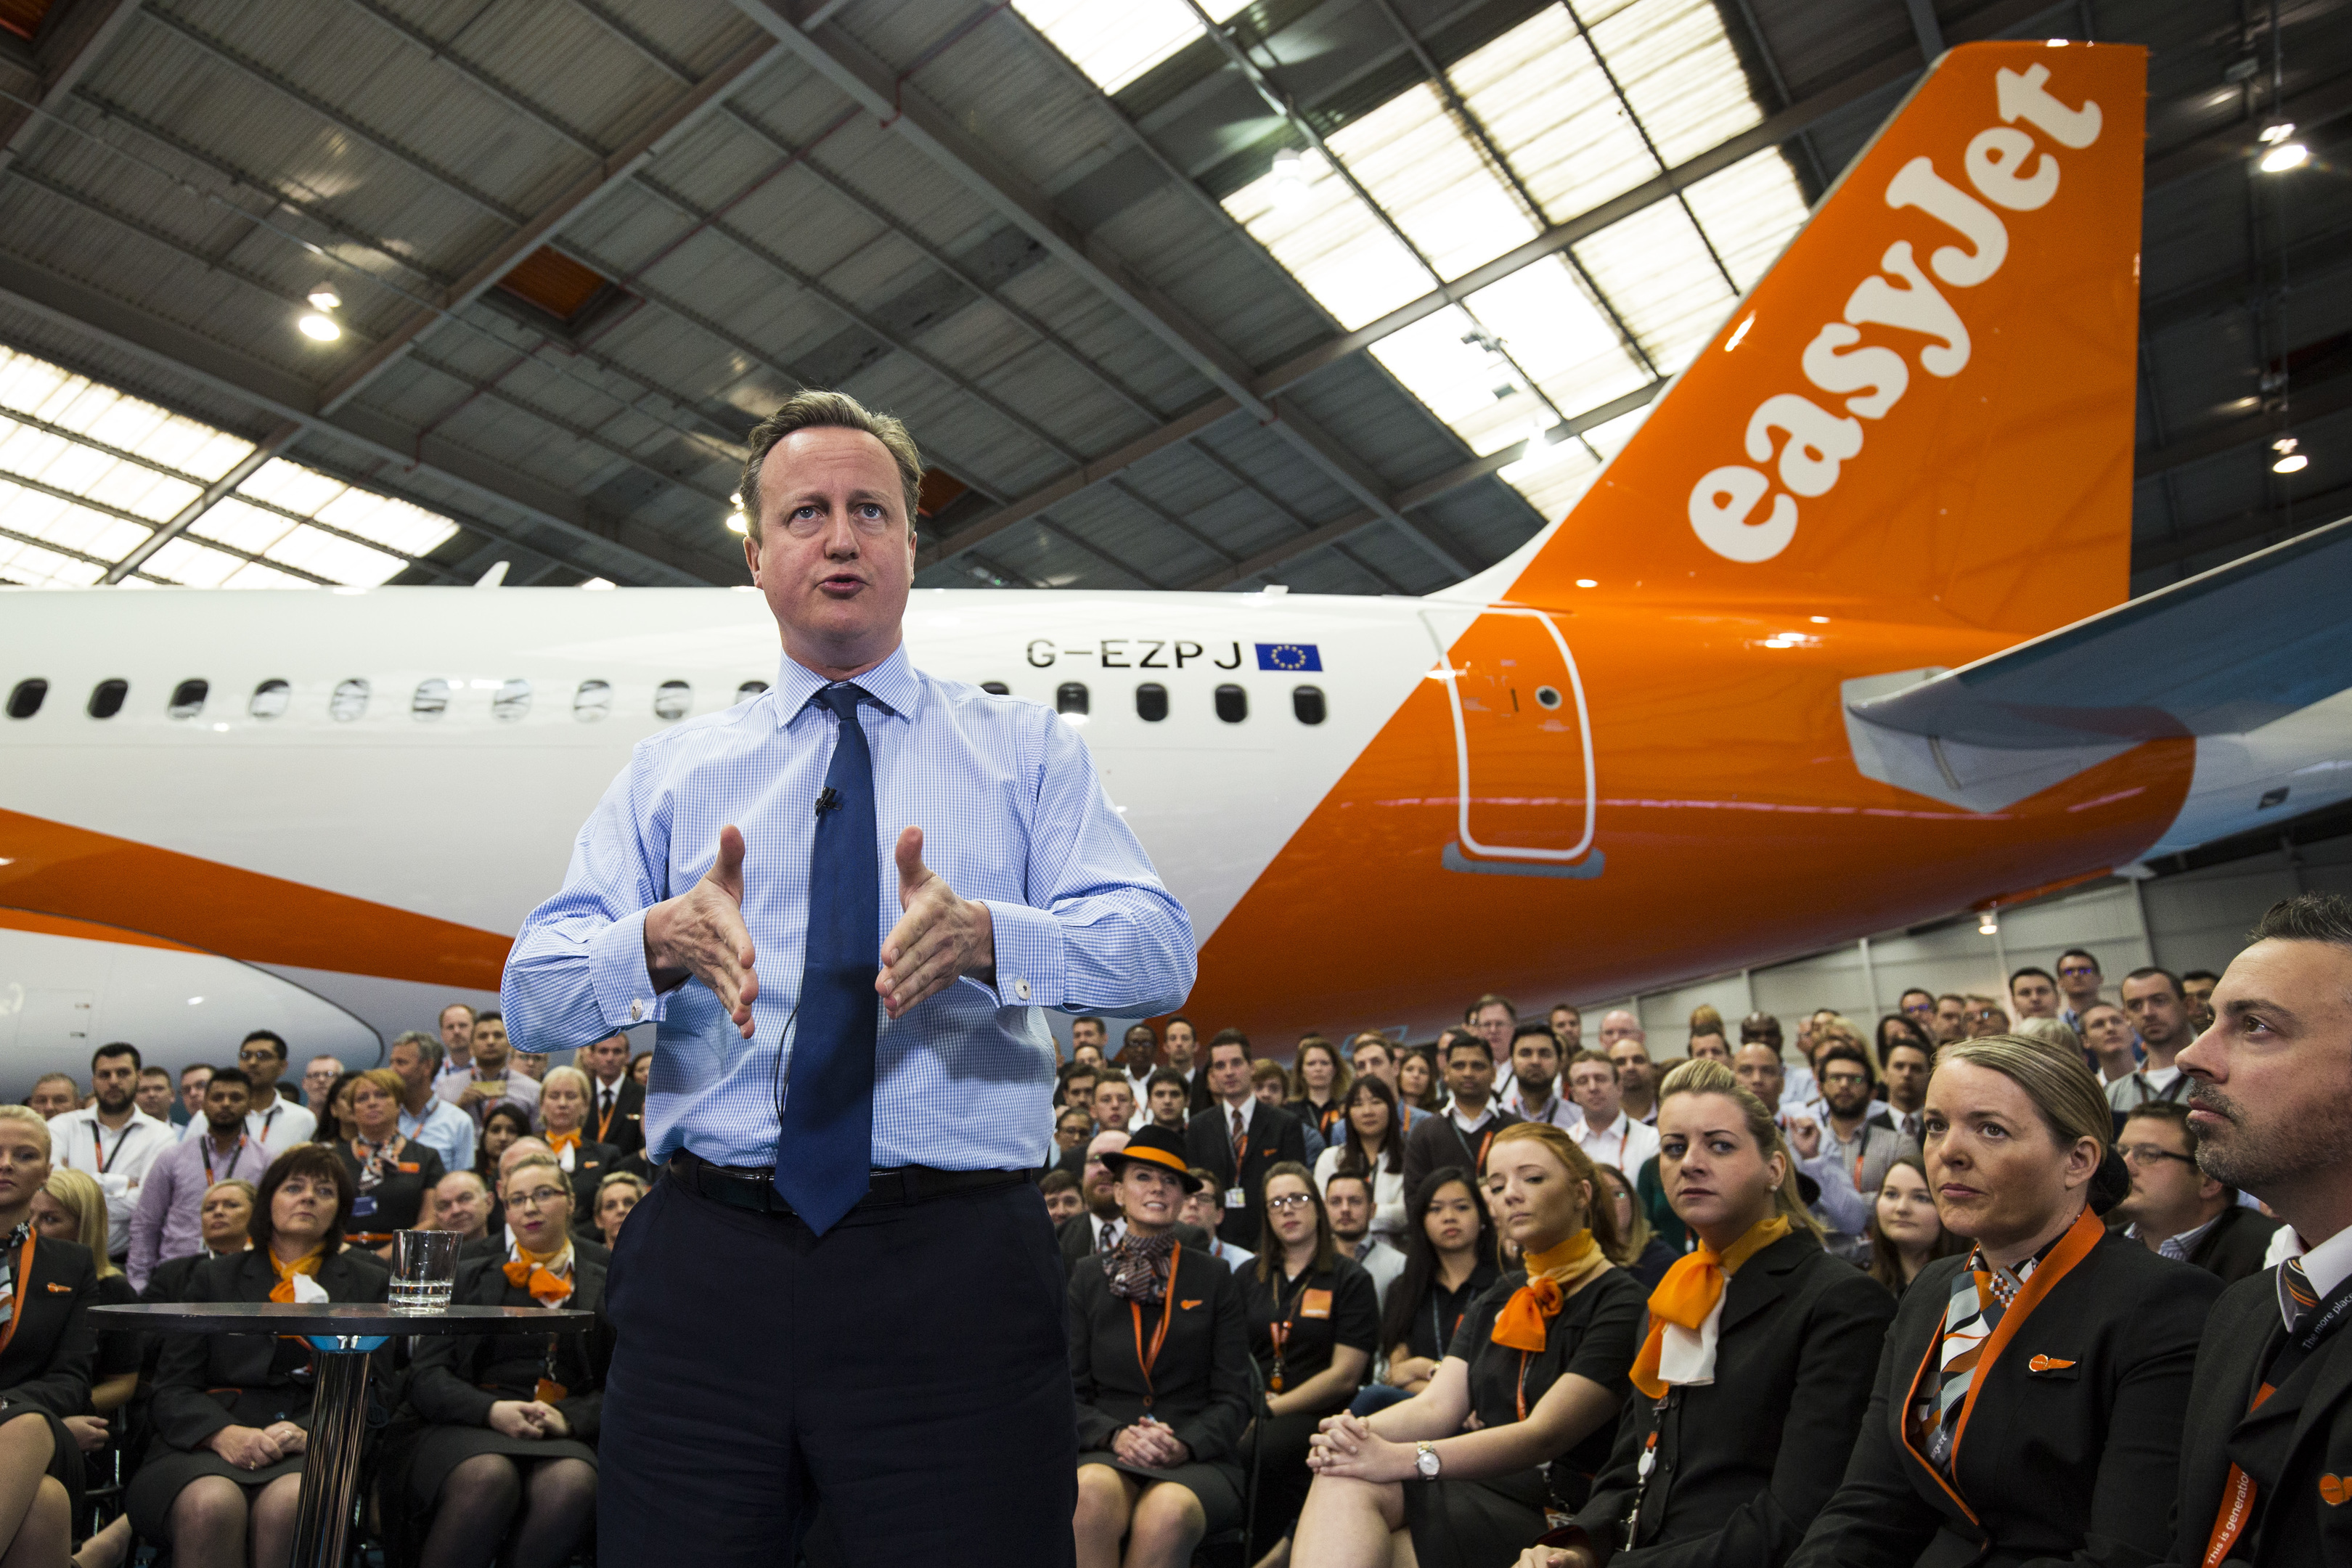 Prime Minister David Cameron delivers a speech to easyJet employees at the aviation company's Luton Airport  hangar.